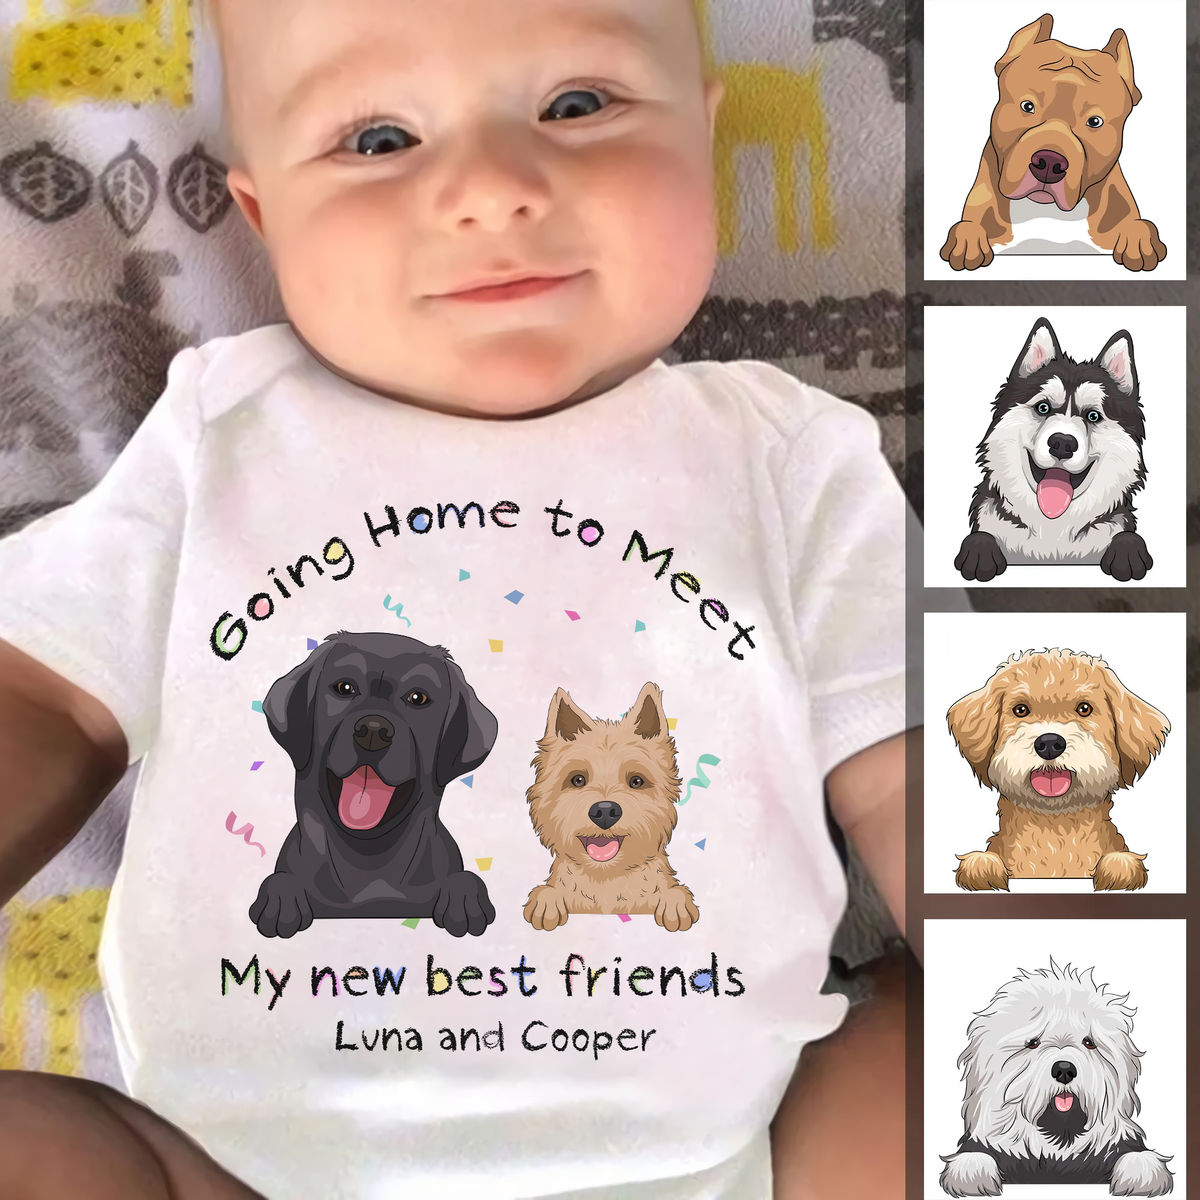 Custom Baby Onesies - going home to meet my new best friend - Personalized Shirt